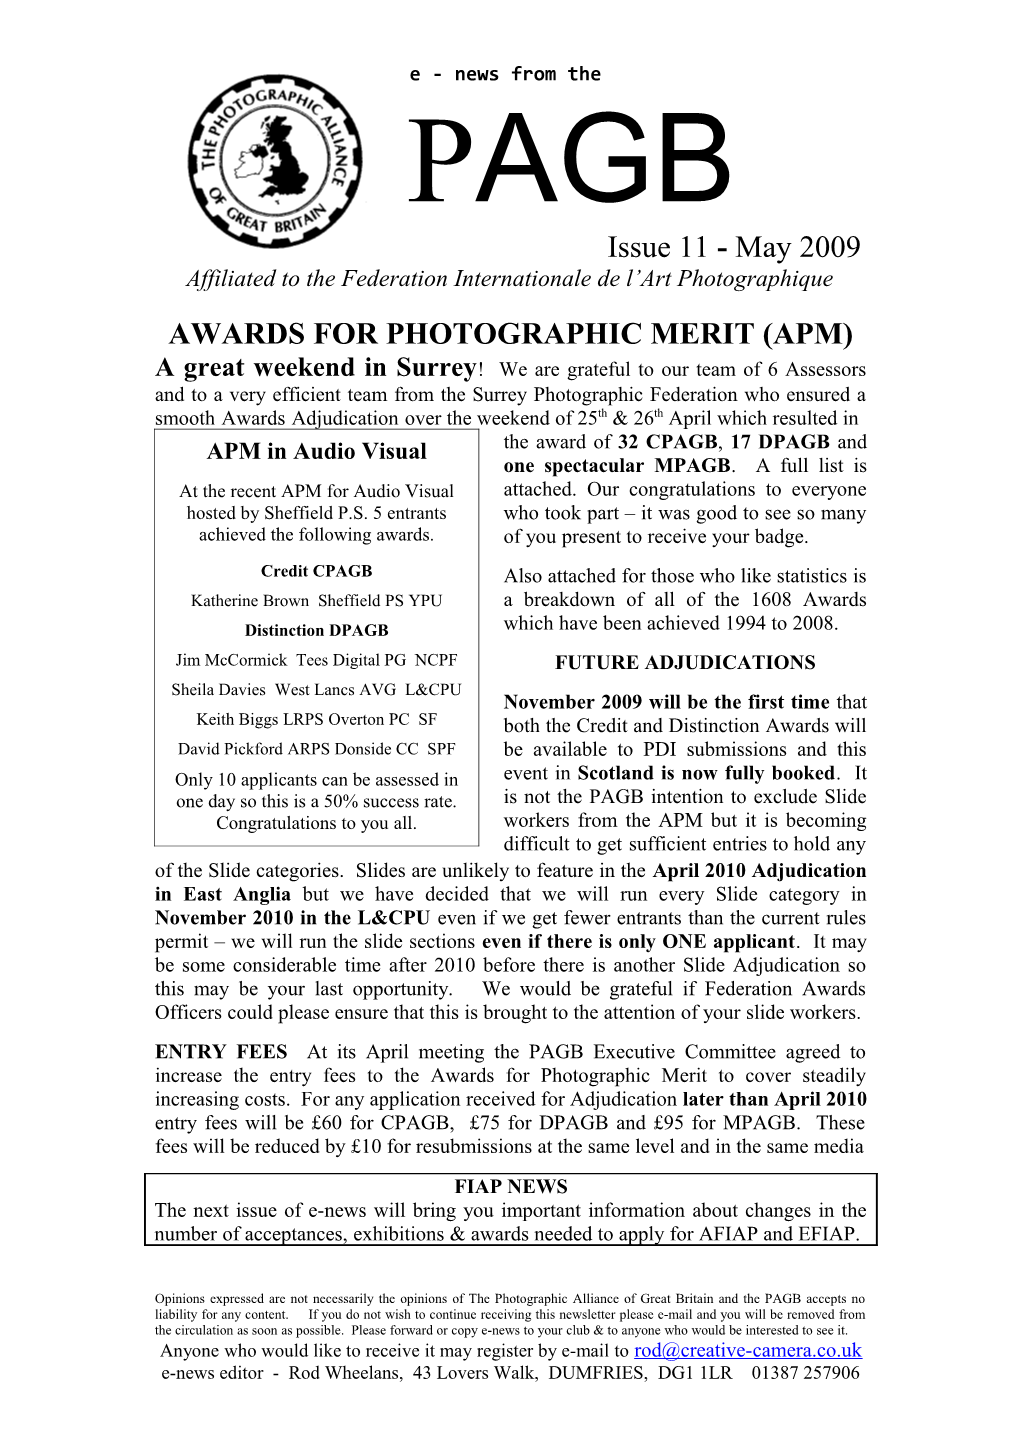 Awards for Photographic Merit (Apm)